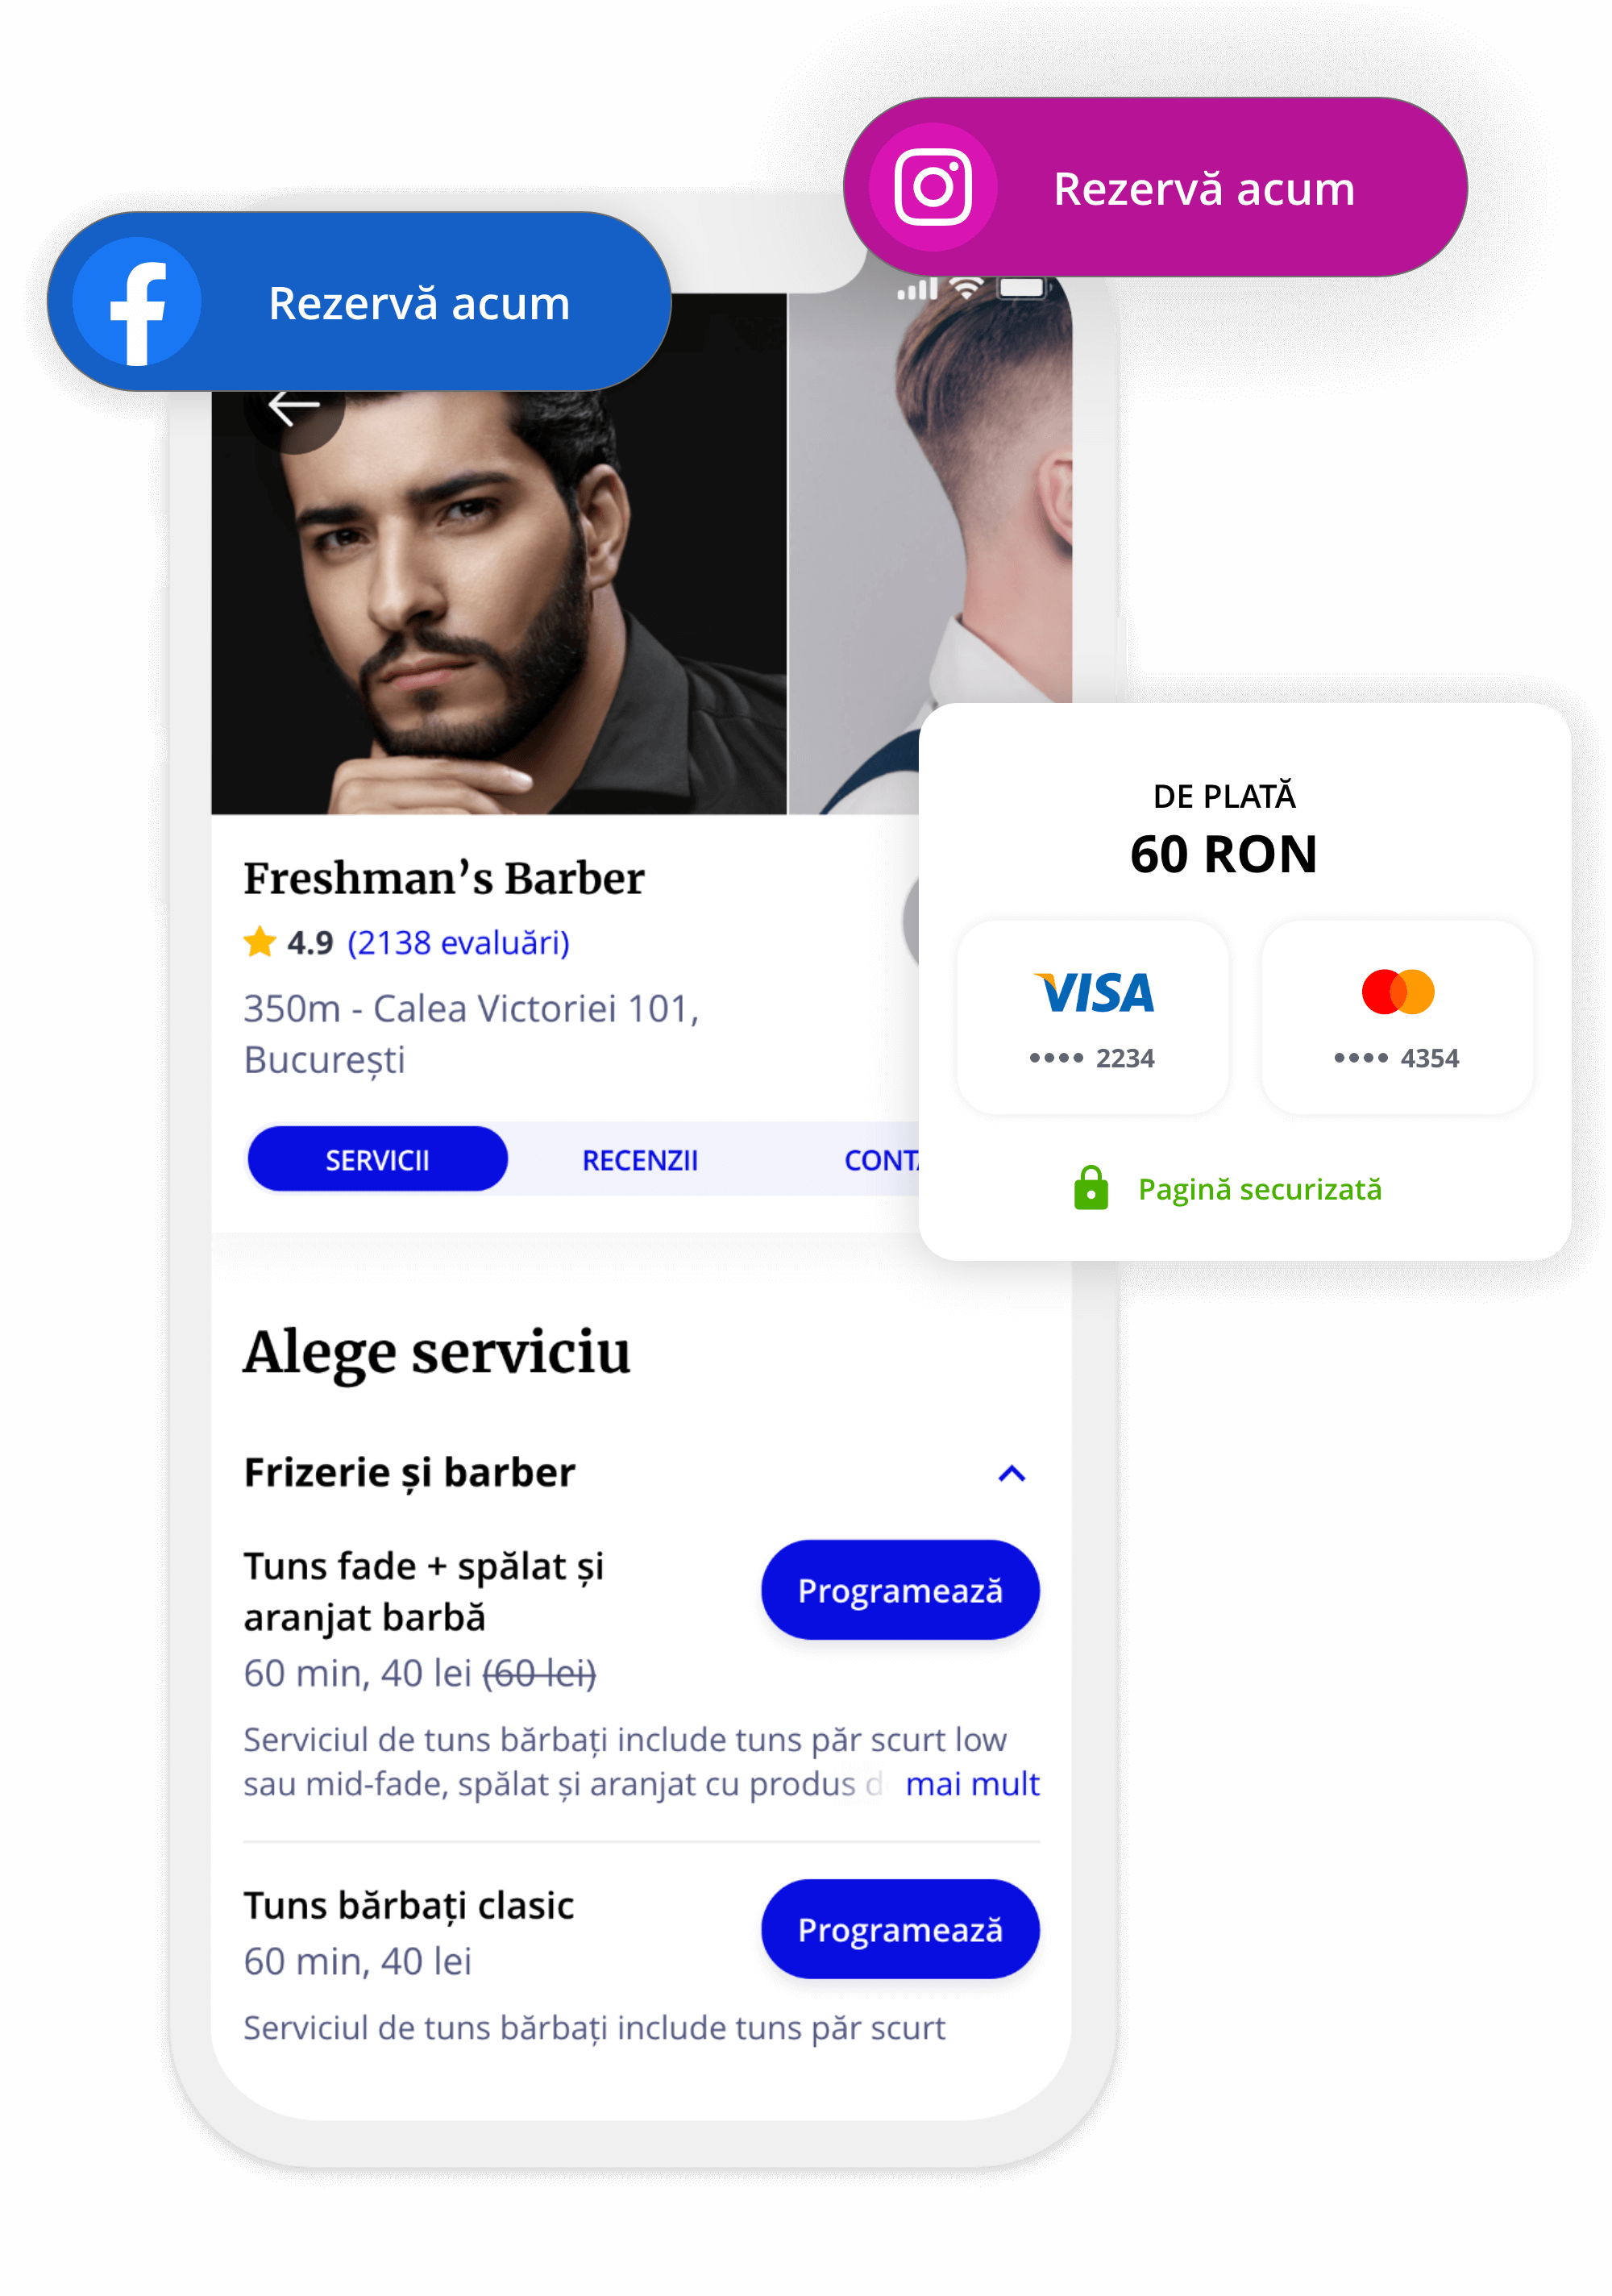 MERO Profile and Payments